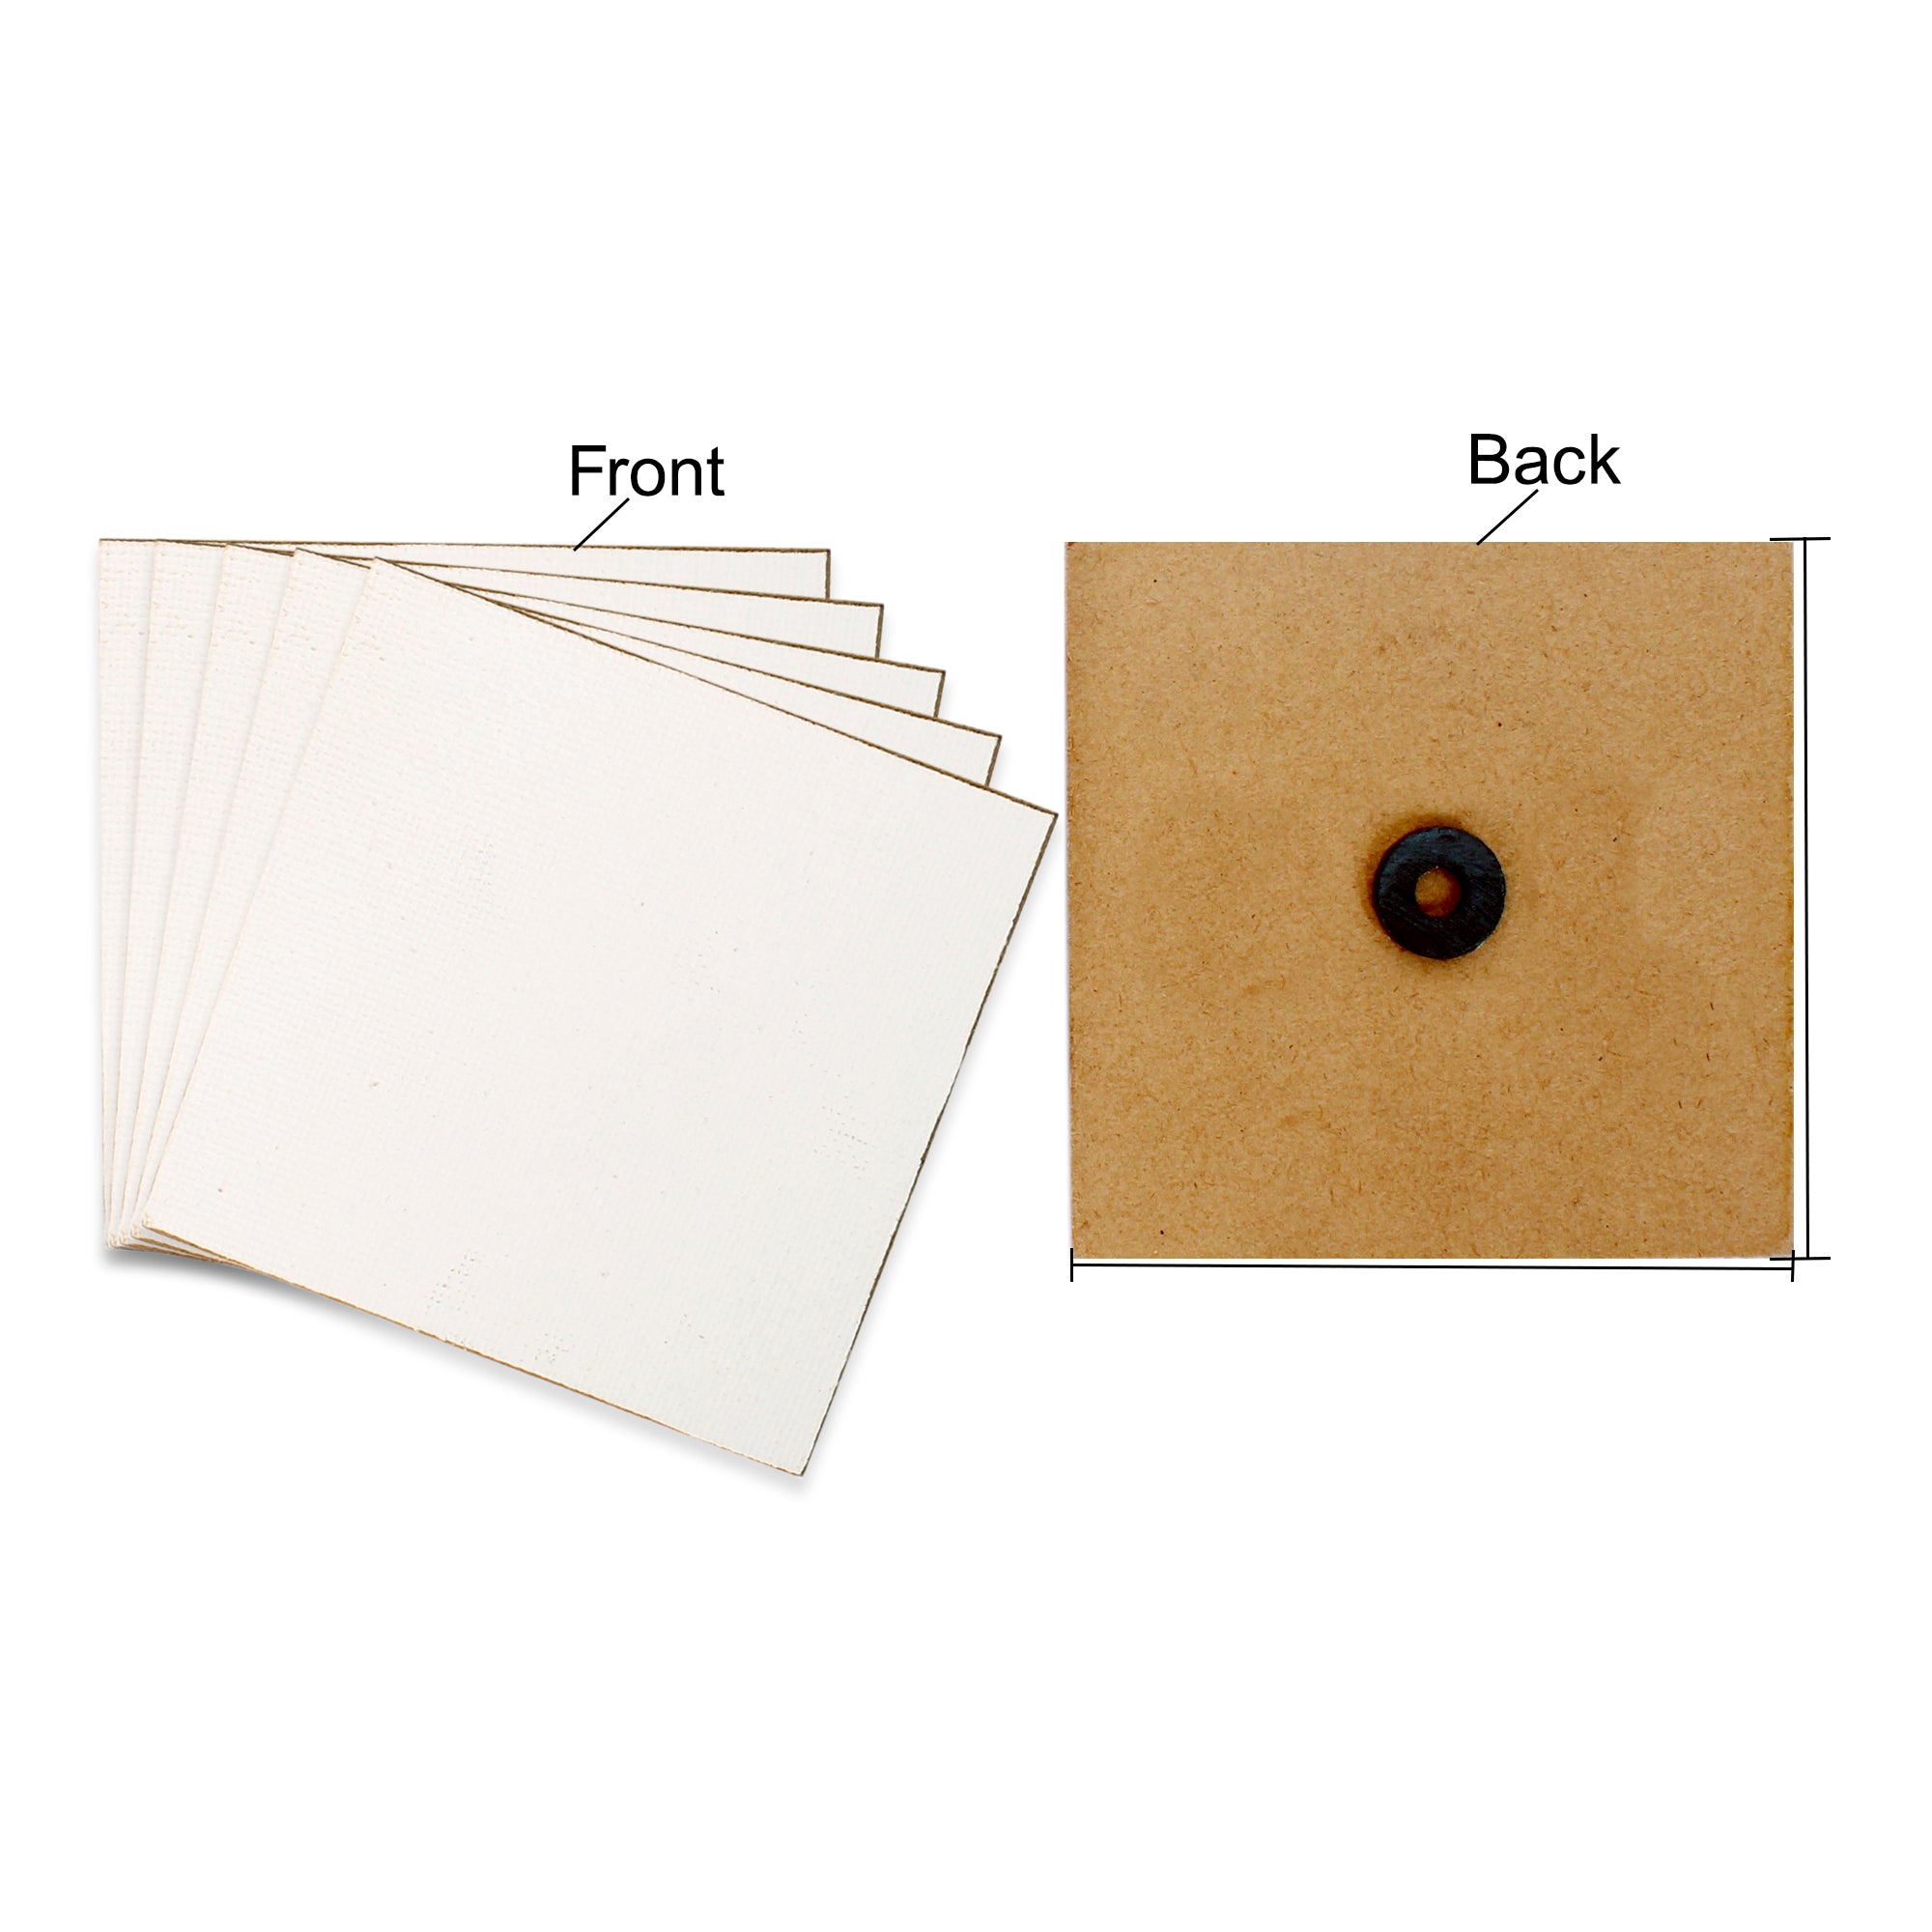 Paintable MDF Canvas Fridge Magnet 2 X 2 Inch 2mm Thick 6Pc